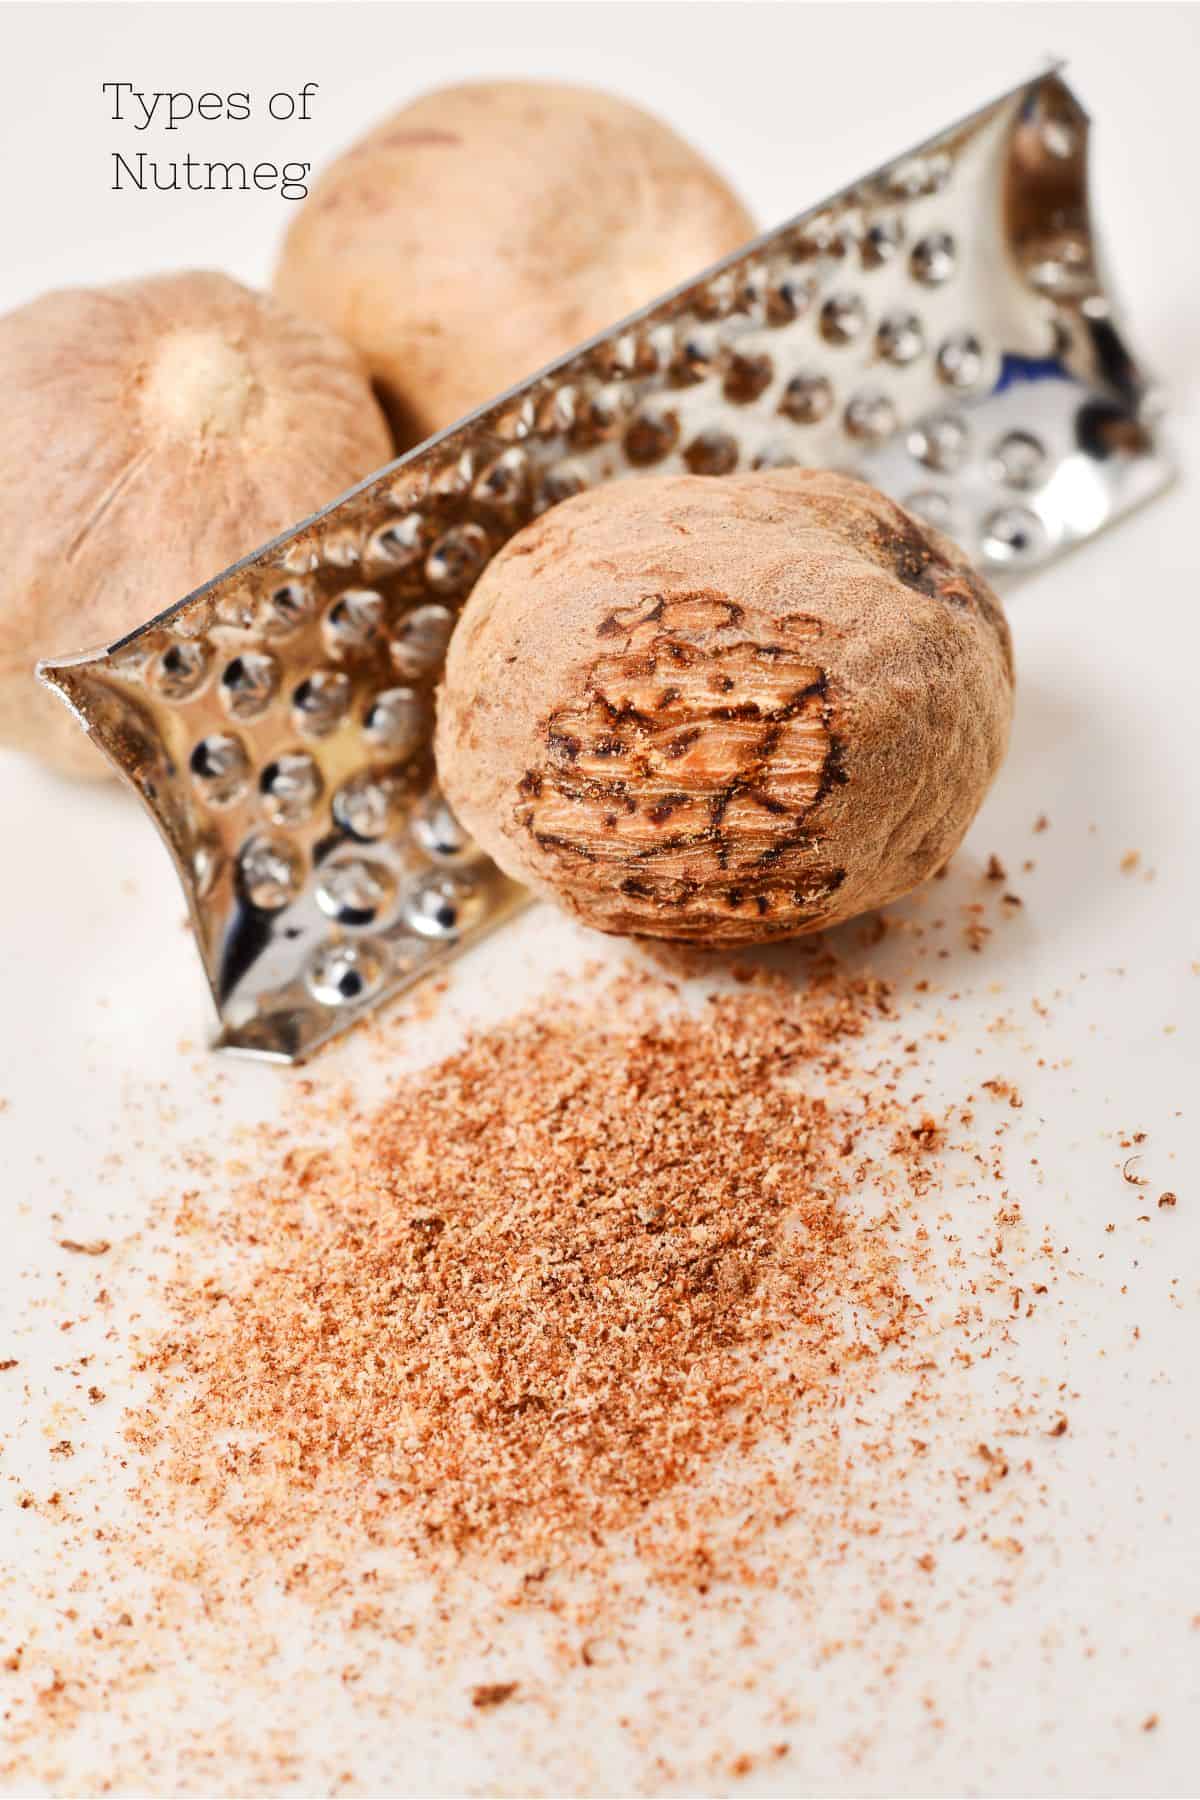 Different types of whole nutmeg next to a grater with freshly grated nutmeg on the side.